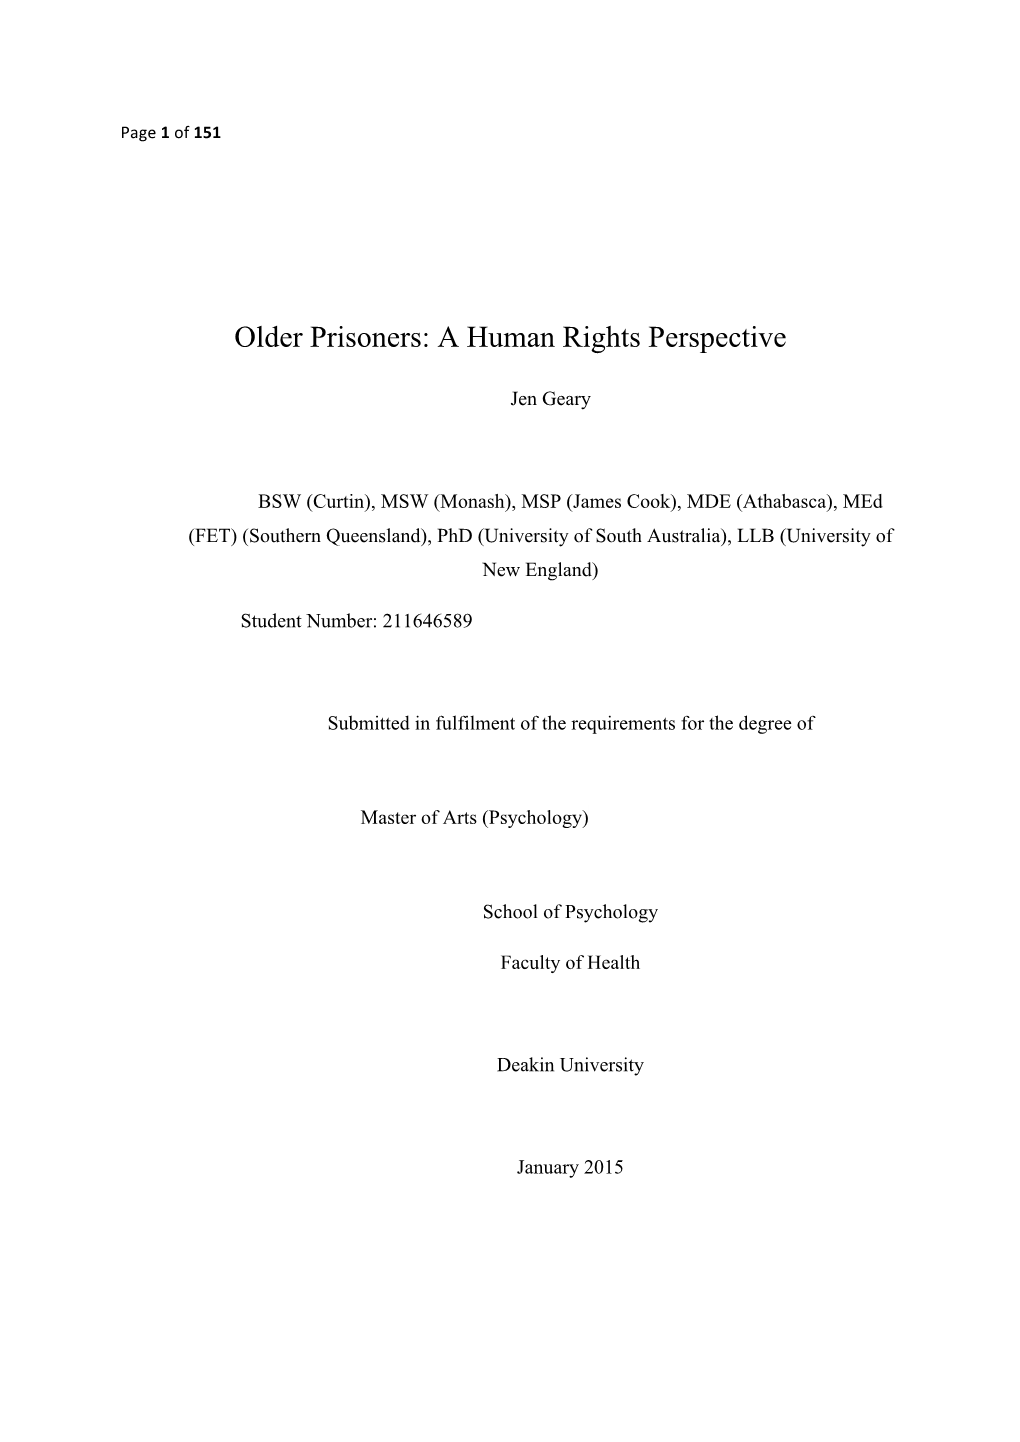 Older Prisoners: a Human Rights Perspective